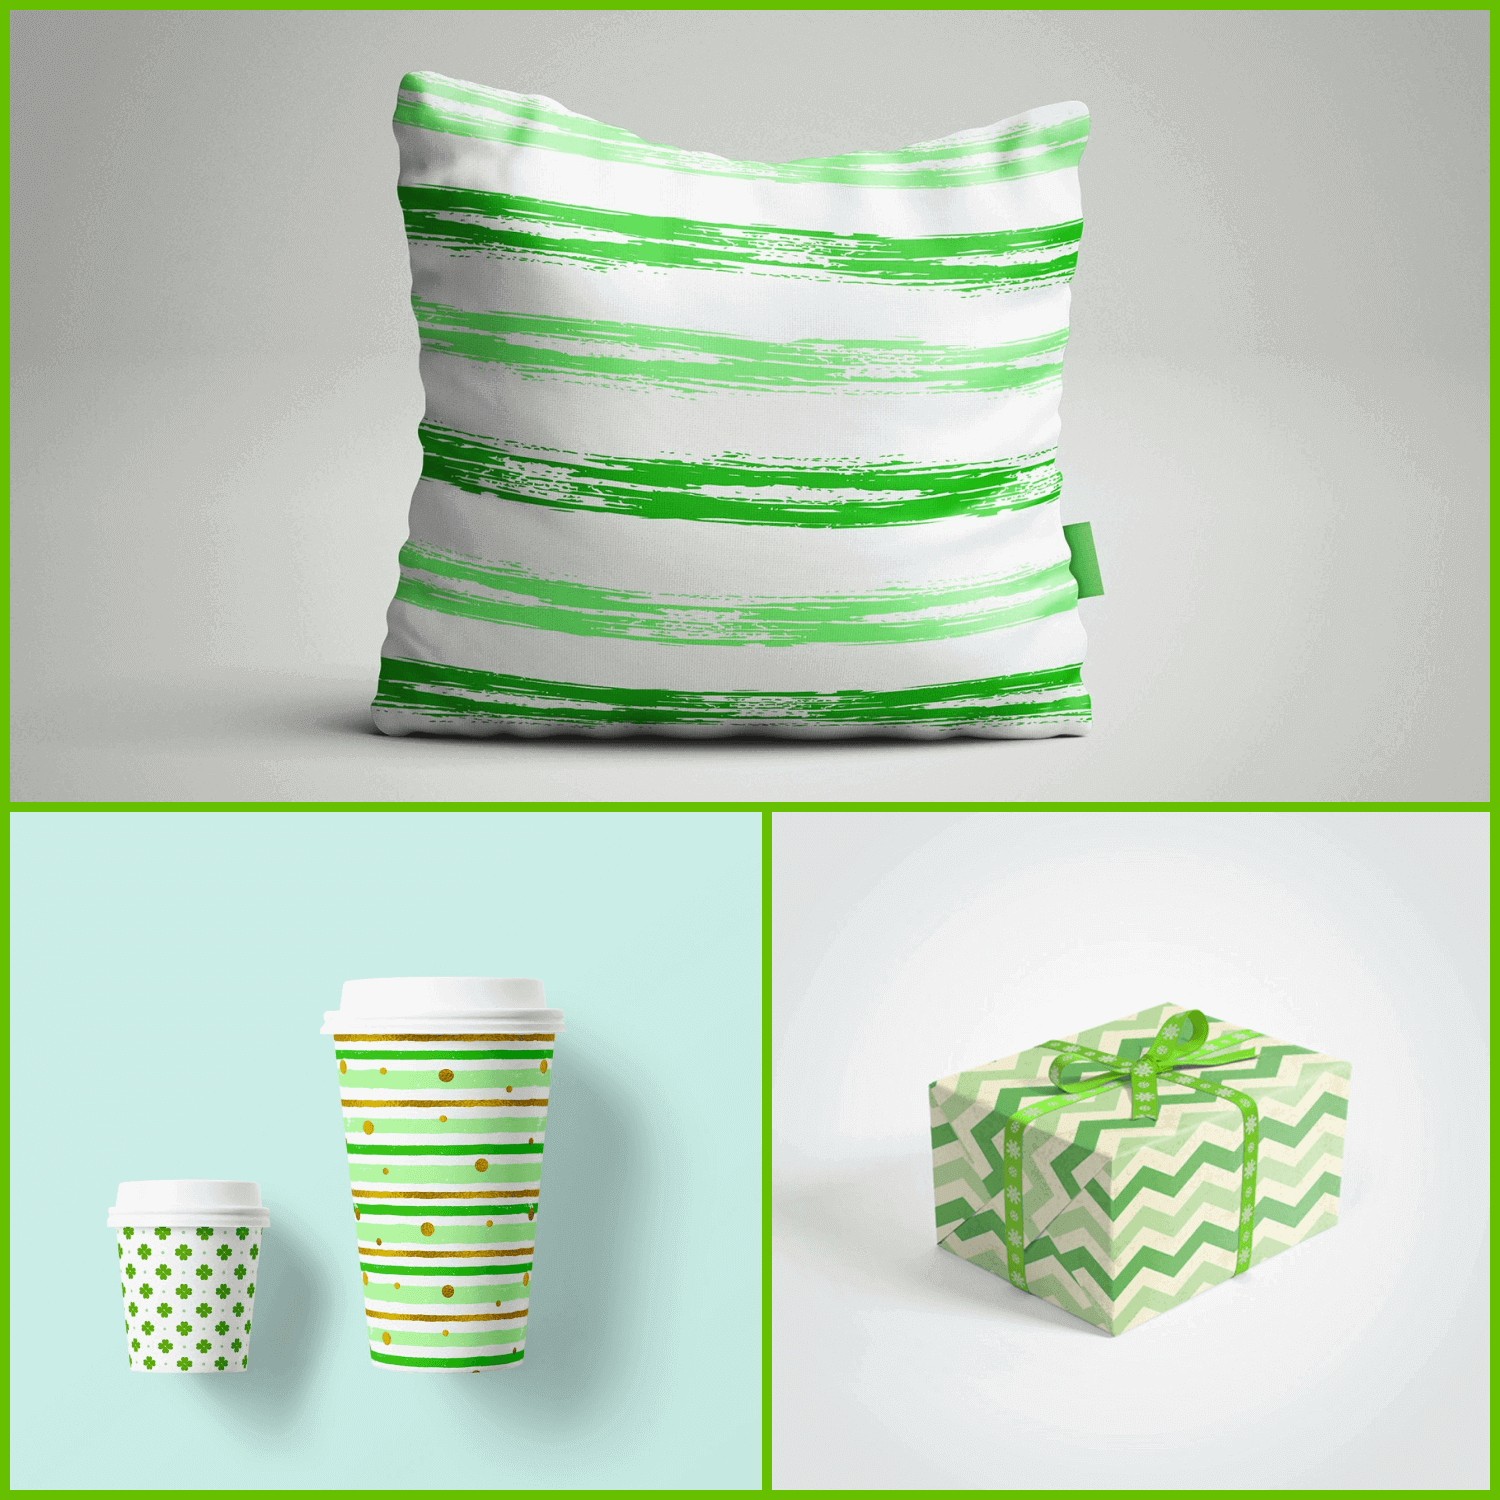 Examples of Using Seamless Patterns of St. Patrick's Day.